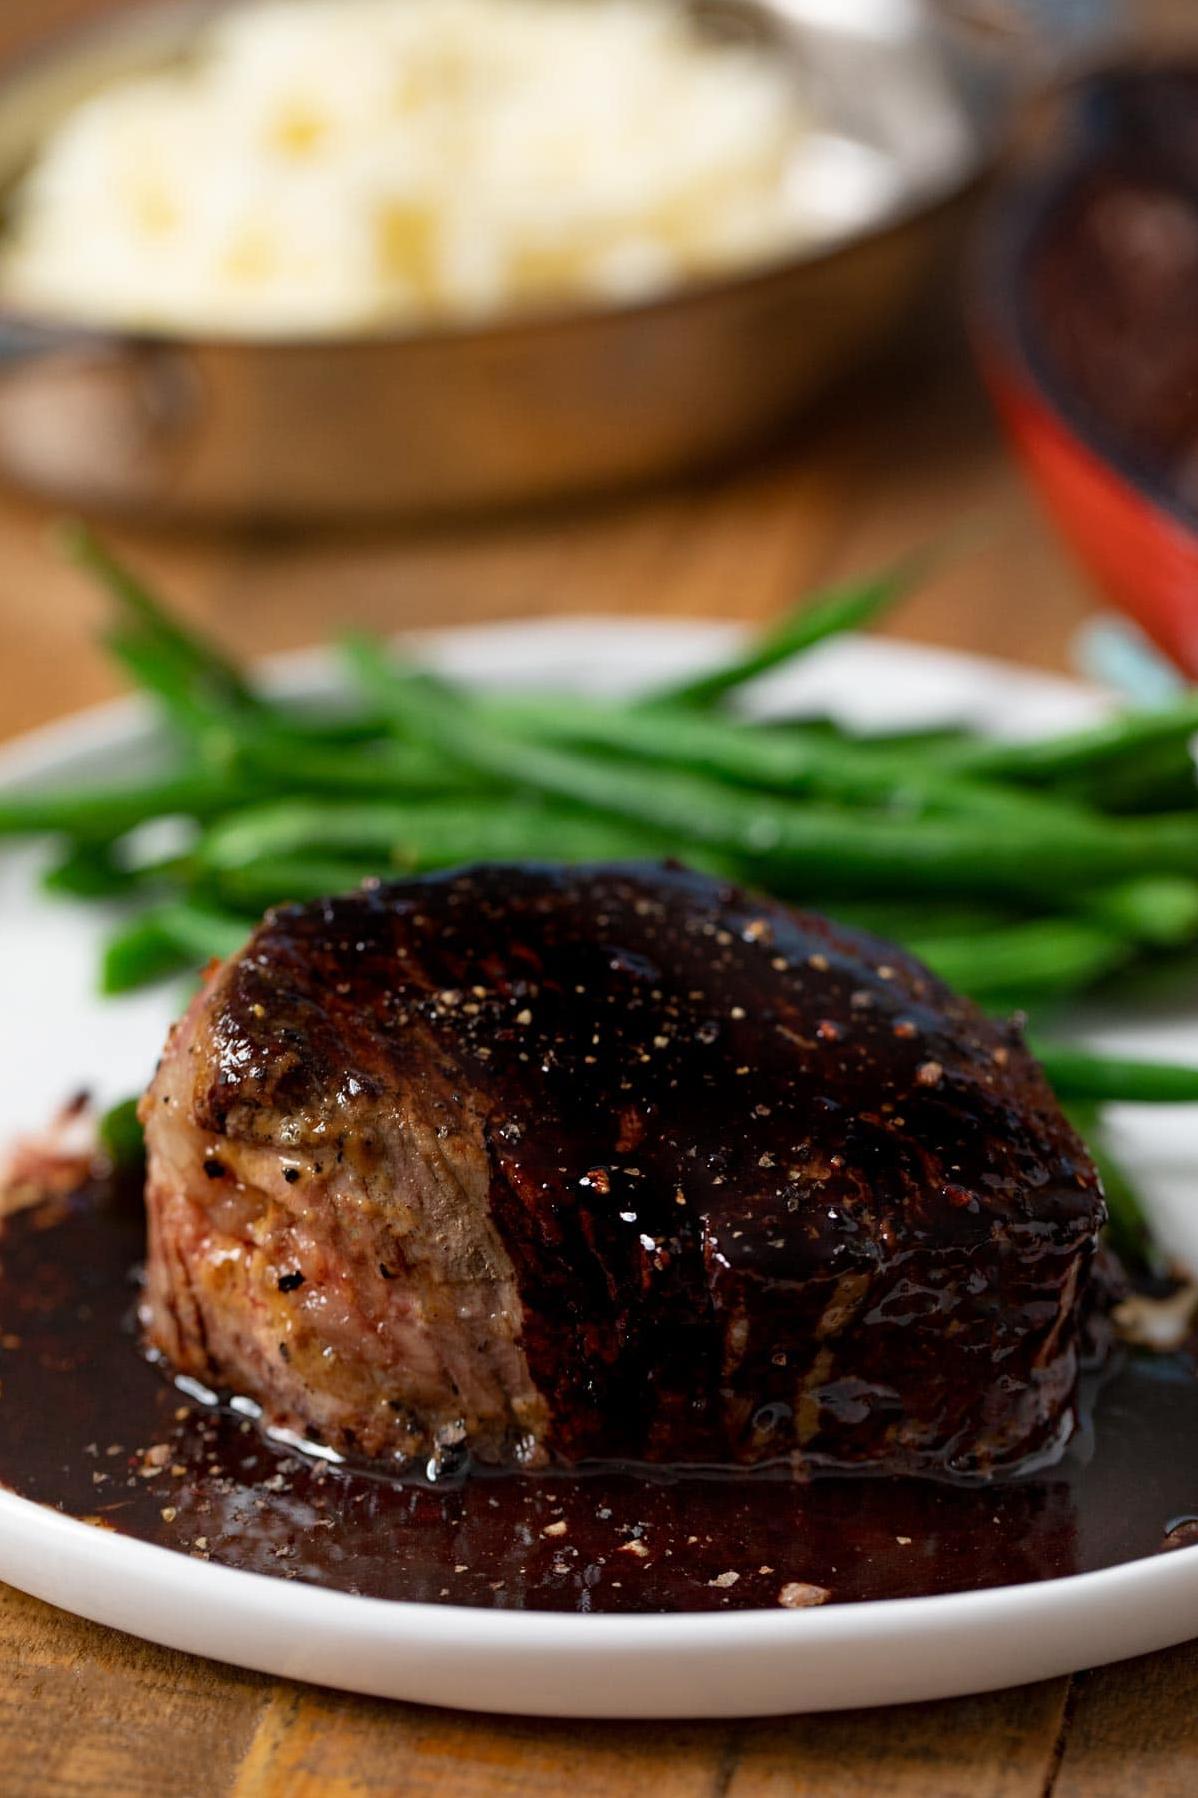  The earthy and smoky notes of the Chianti wine perfectly complement the tender steak.